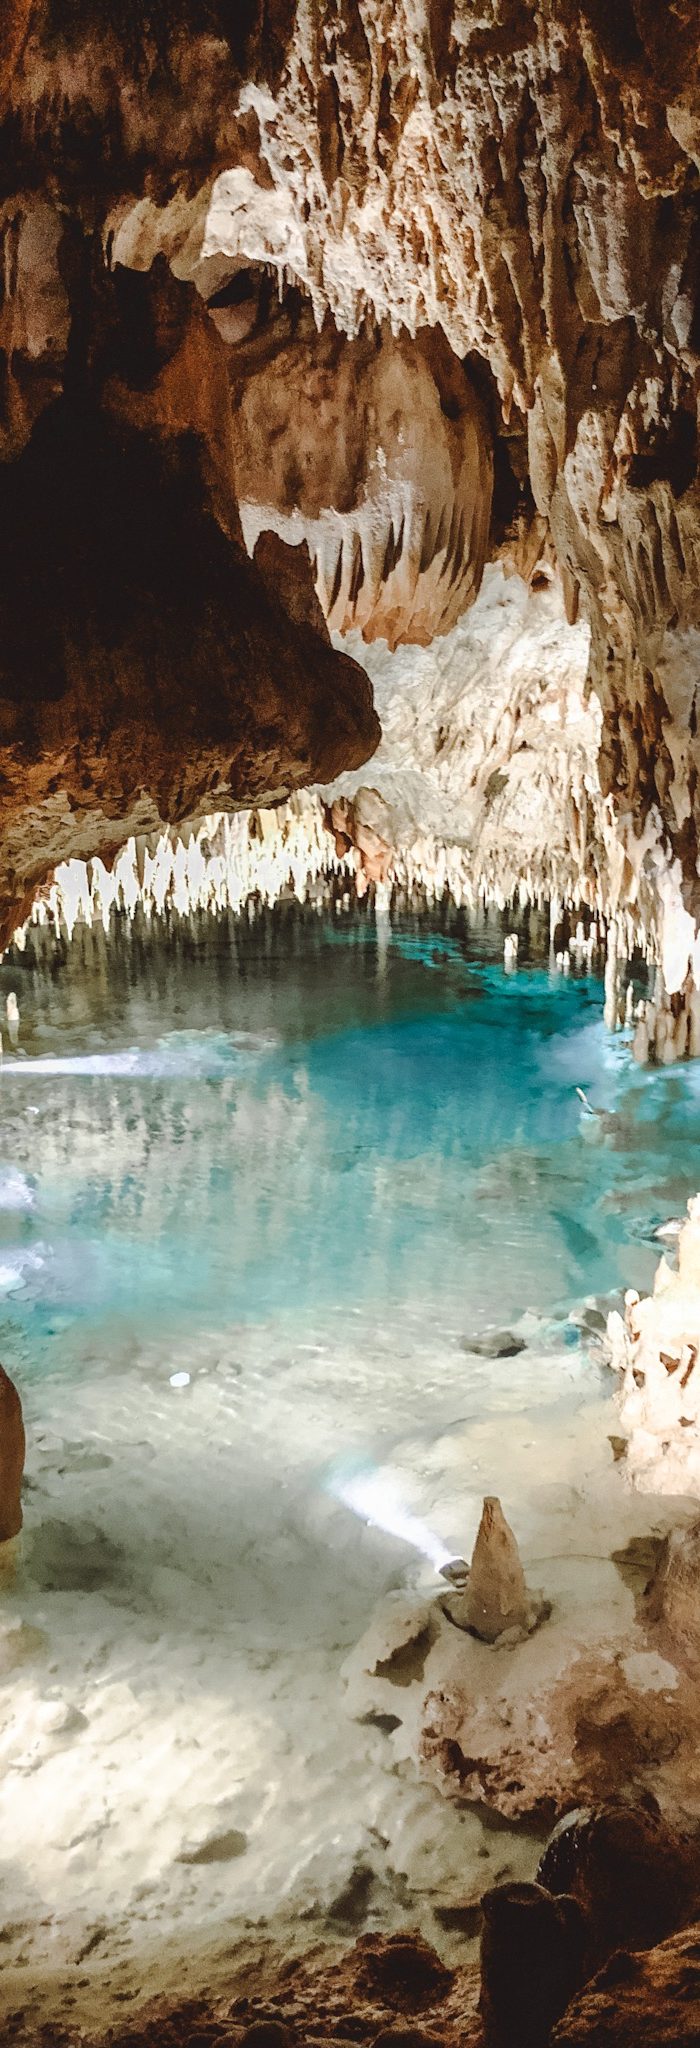 Alyssa Campanella of The A List blog visits Cayman Islands and explores Cayman Crystal Caves